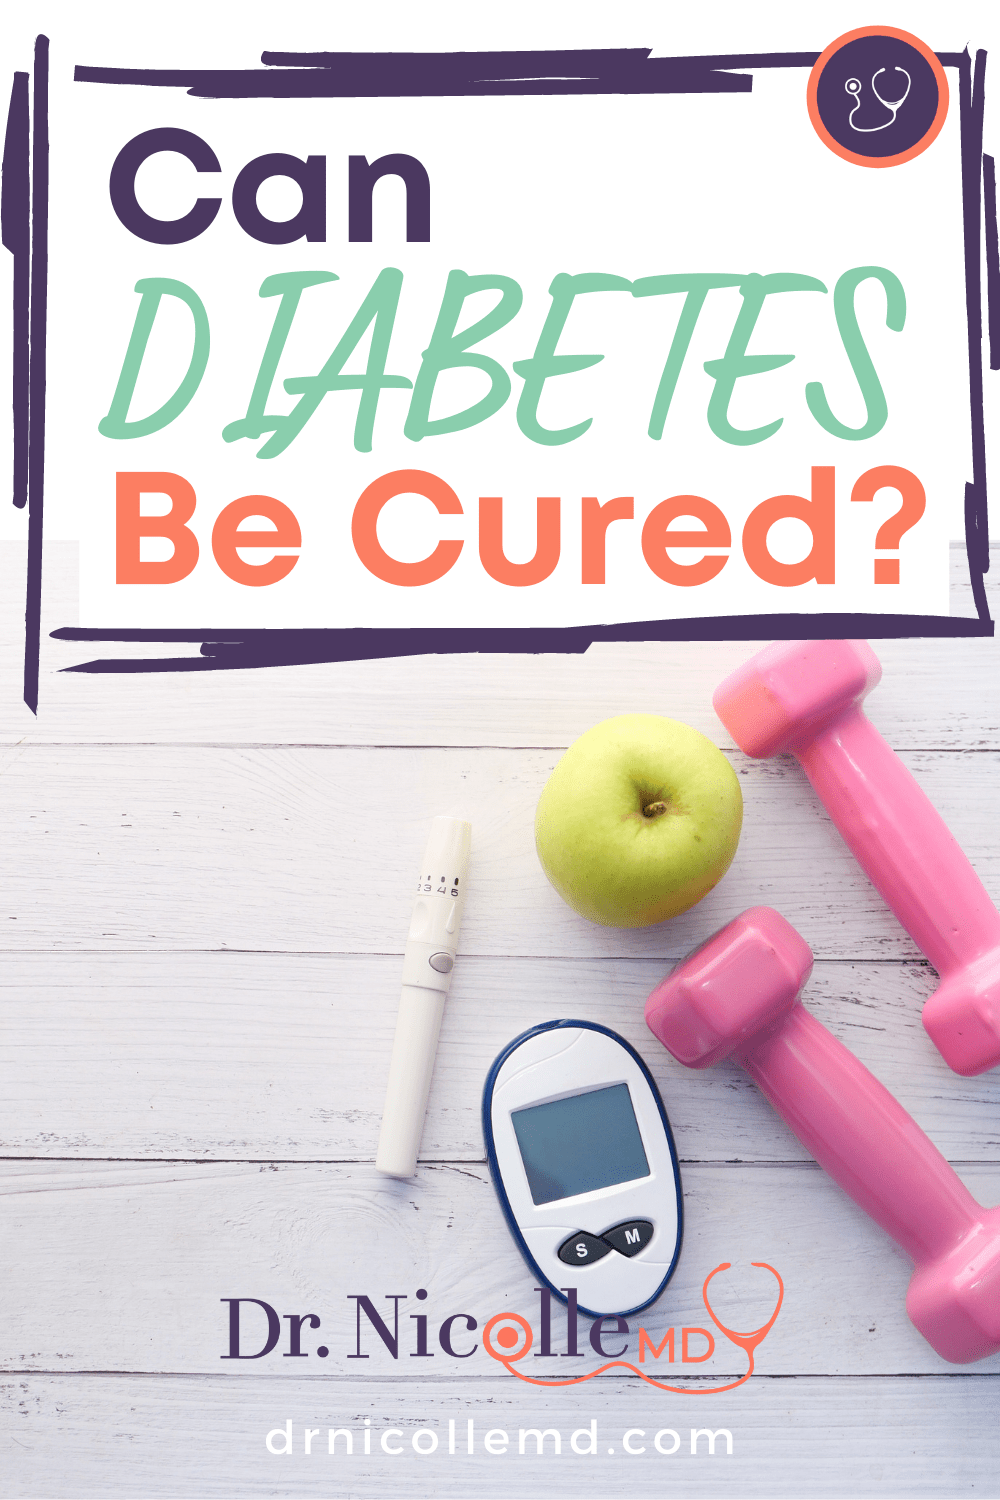 Can Diabetes Be Cured?